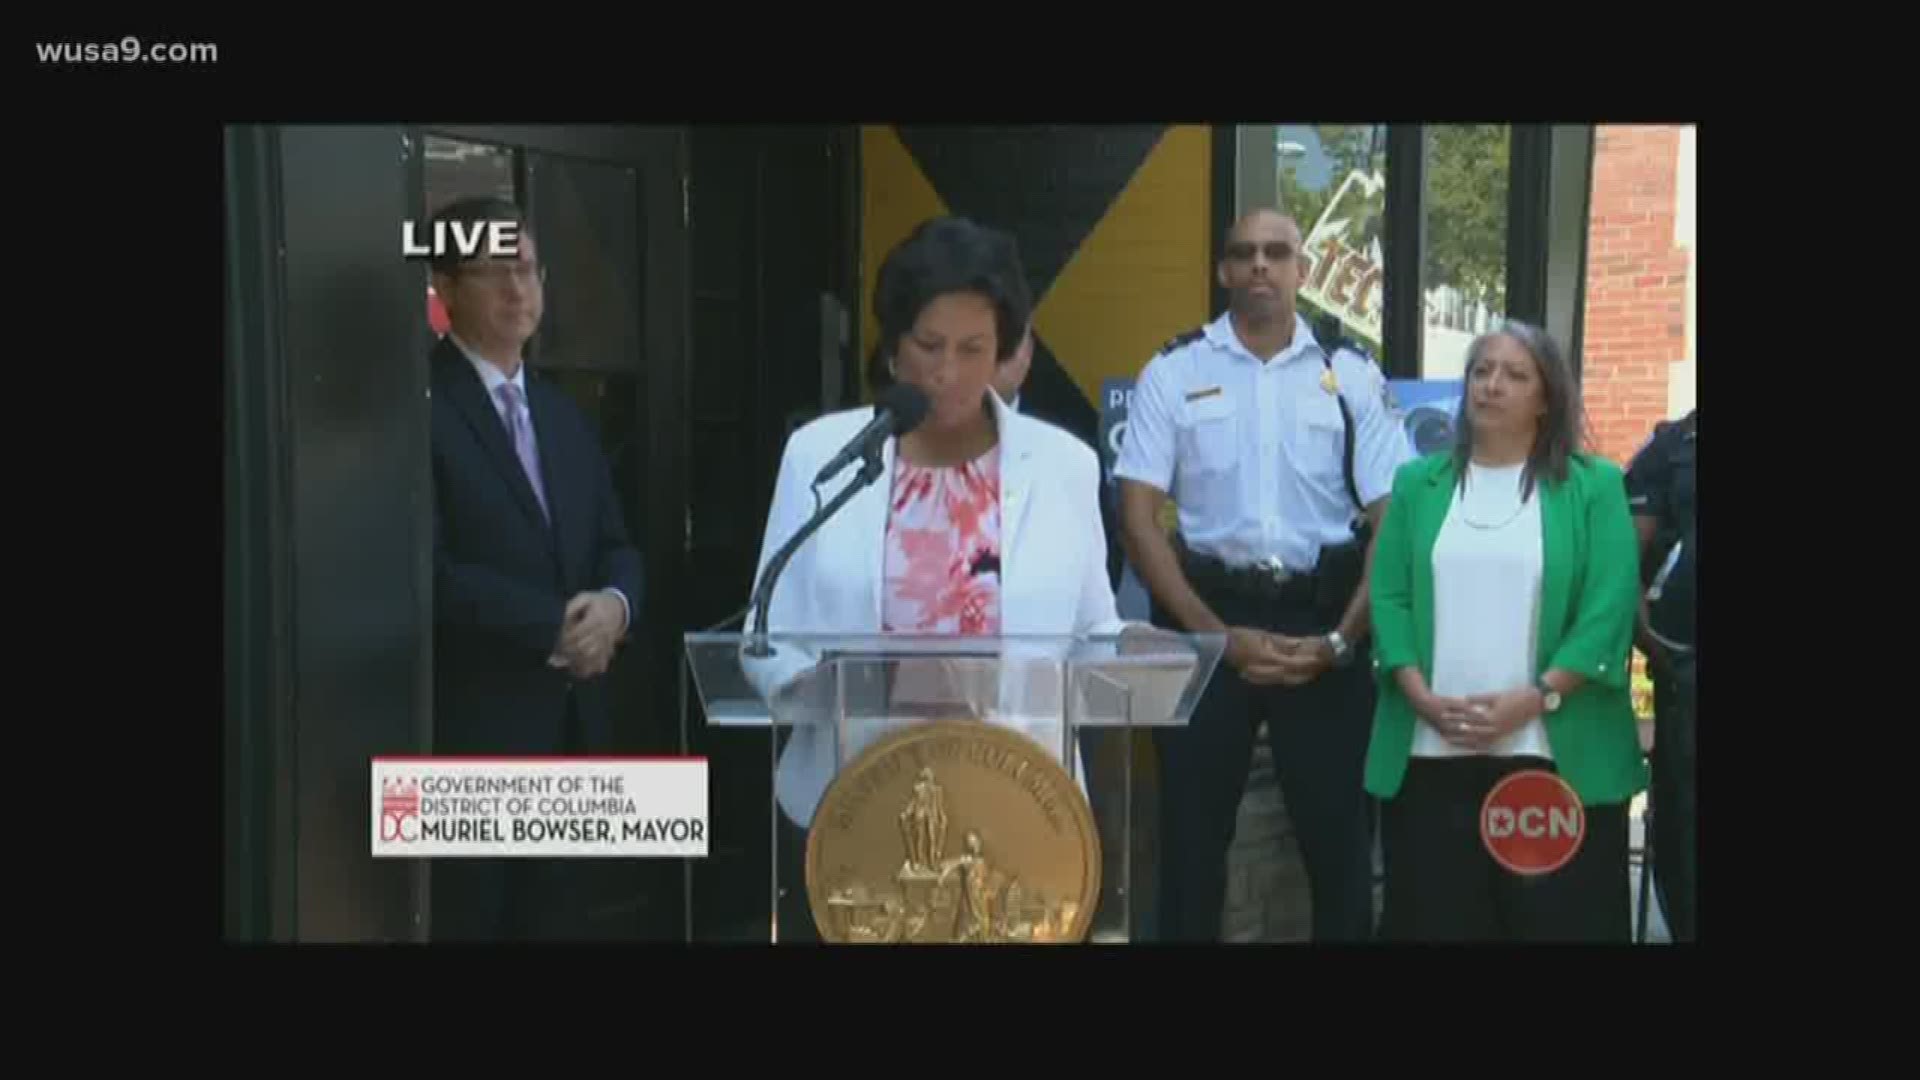 The program has funded over 15,000 cameras and assisted police efforts to create a #SaferStrongerDC.